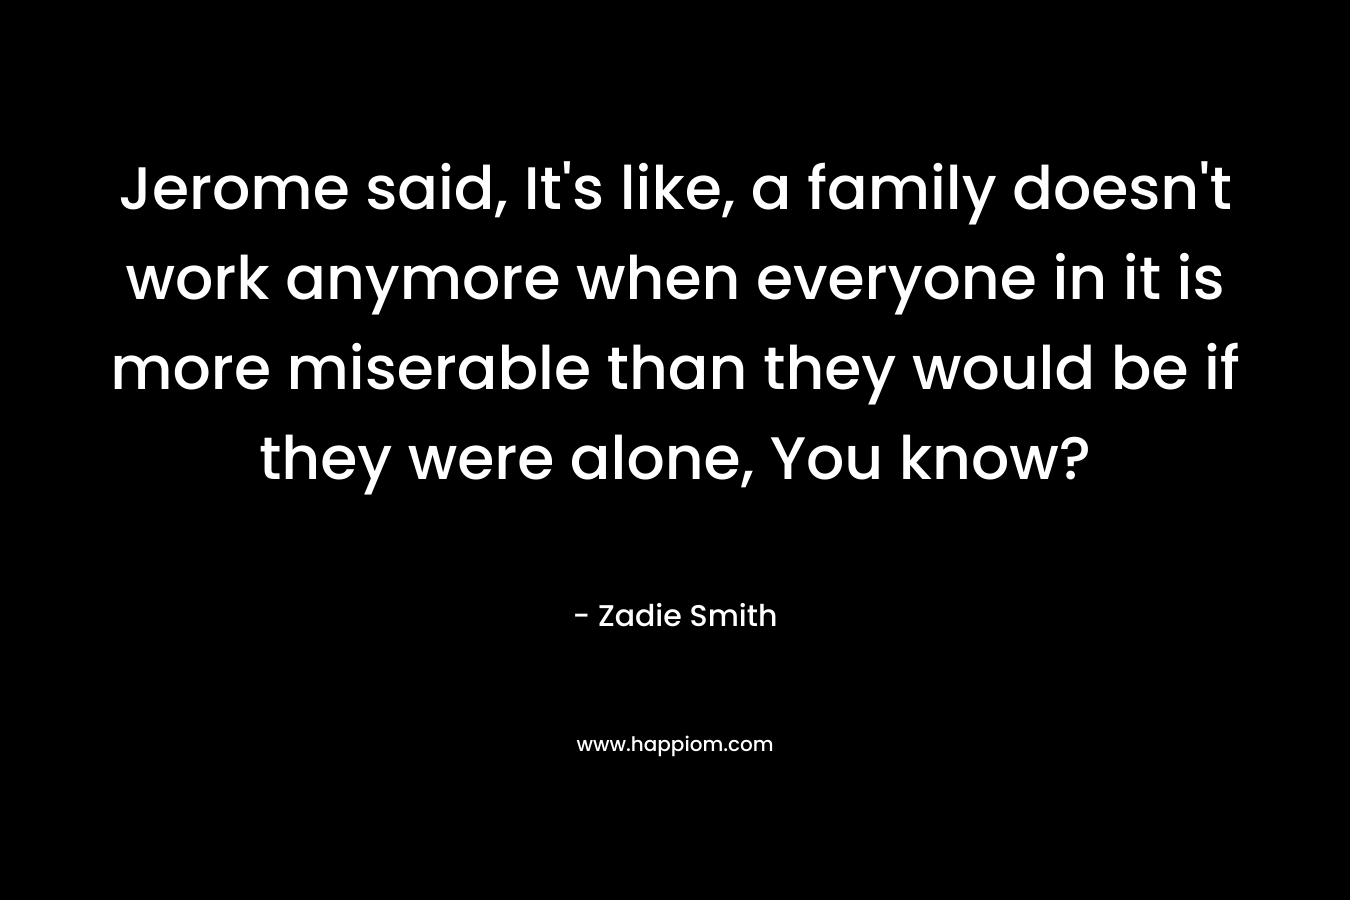 Jerome said, It's like, a family doesn't work anymore when everyone in it is more miserable than they would be if they were alone, You know?